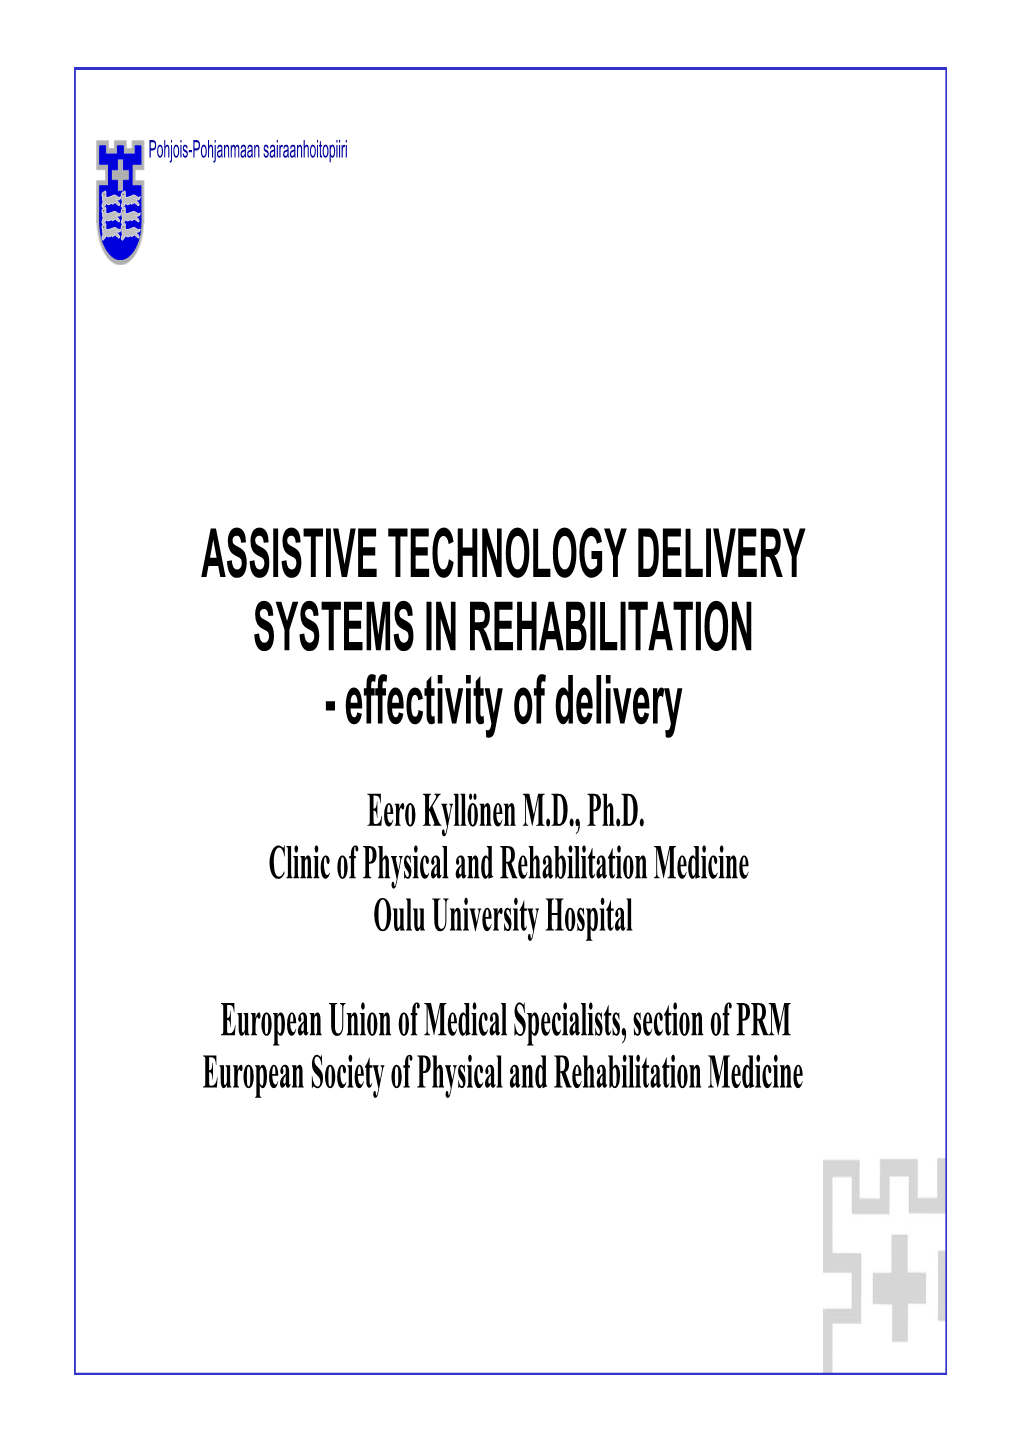 Effectivity of Delivery